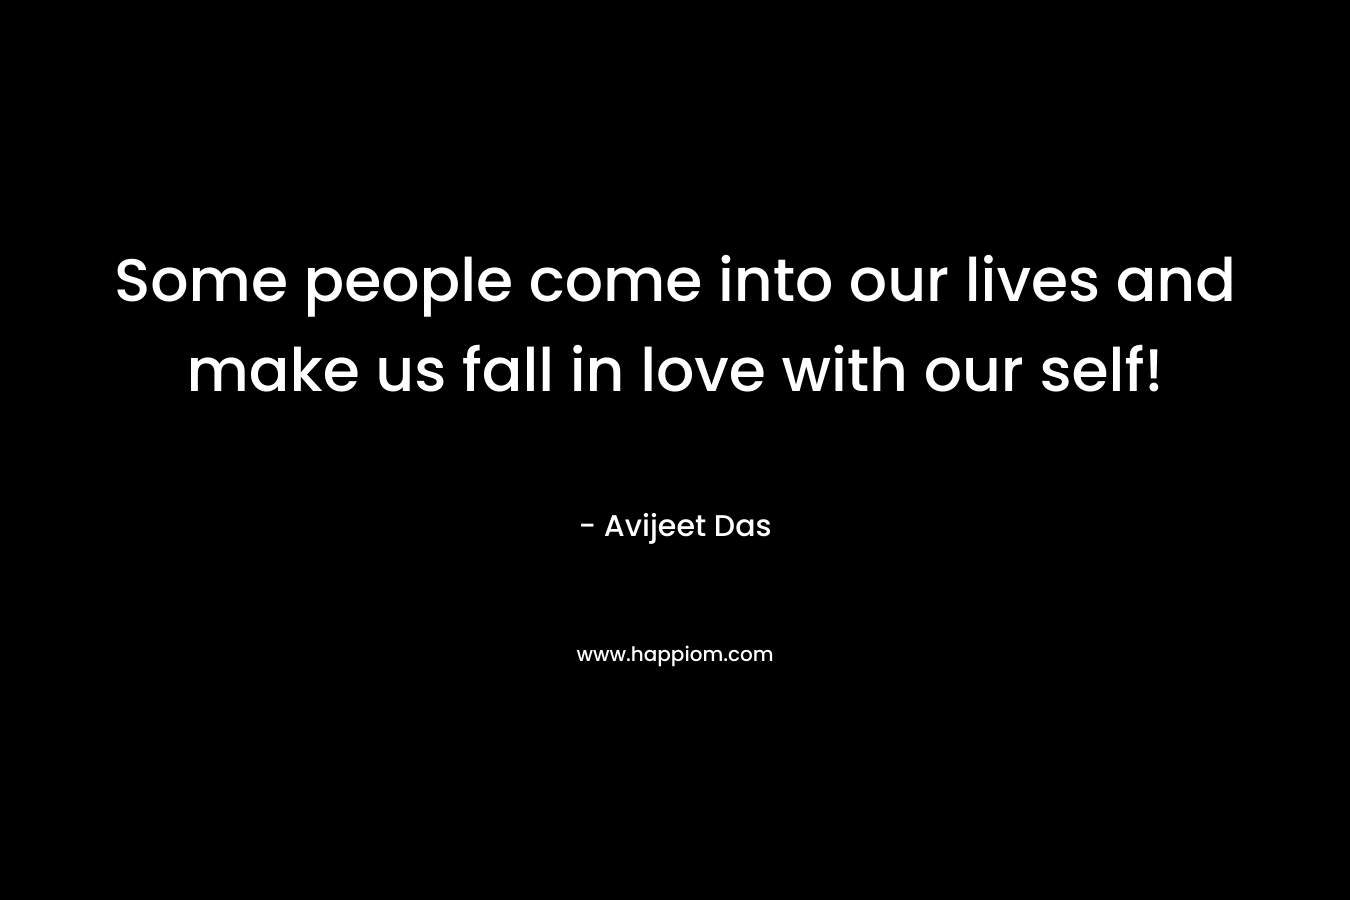 Some people come into our lives and make us fall in love with our self!